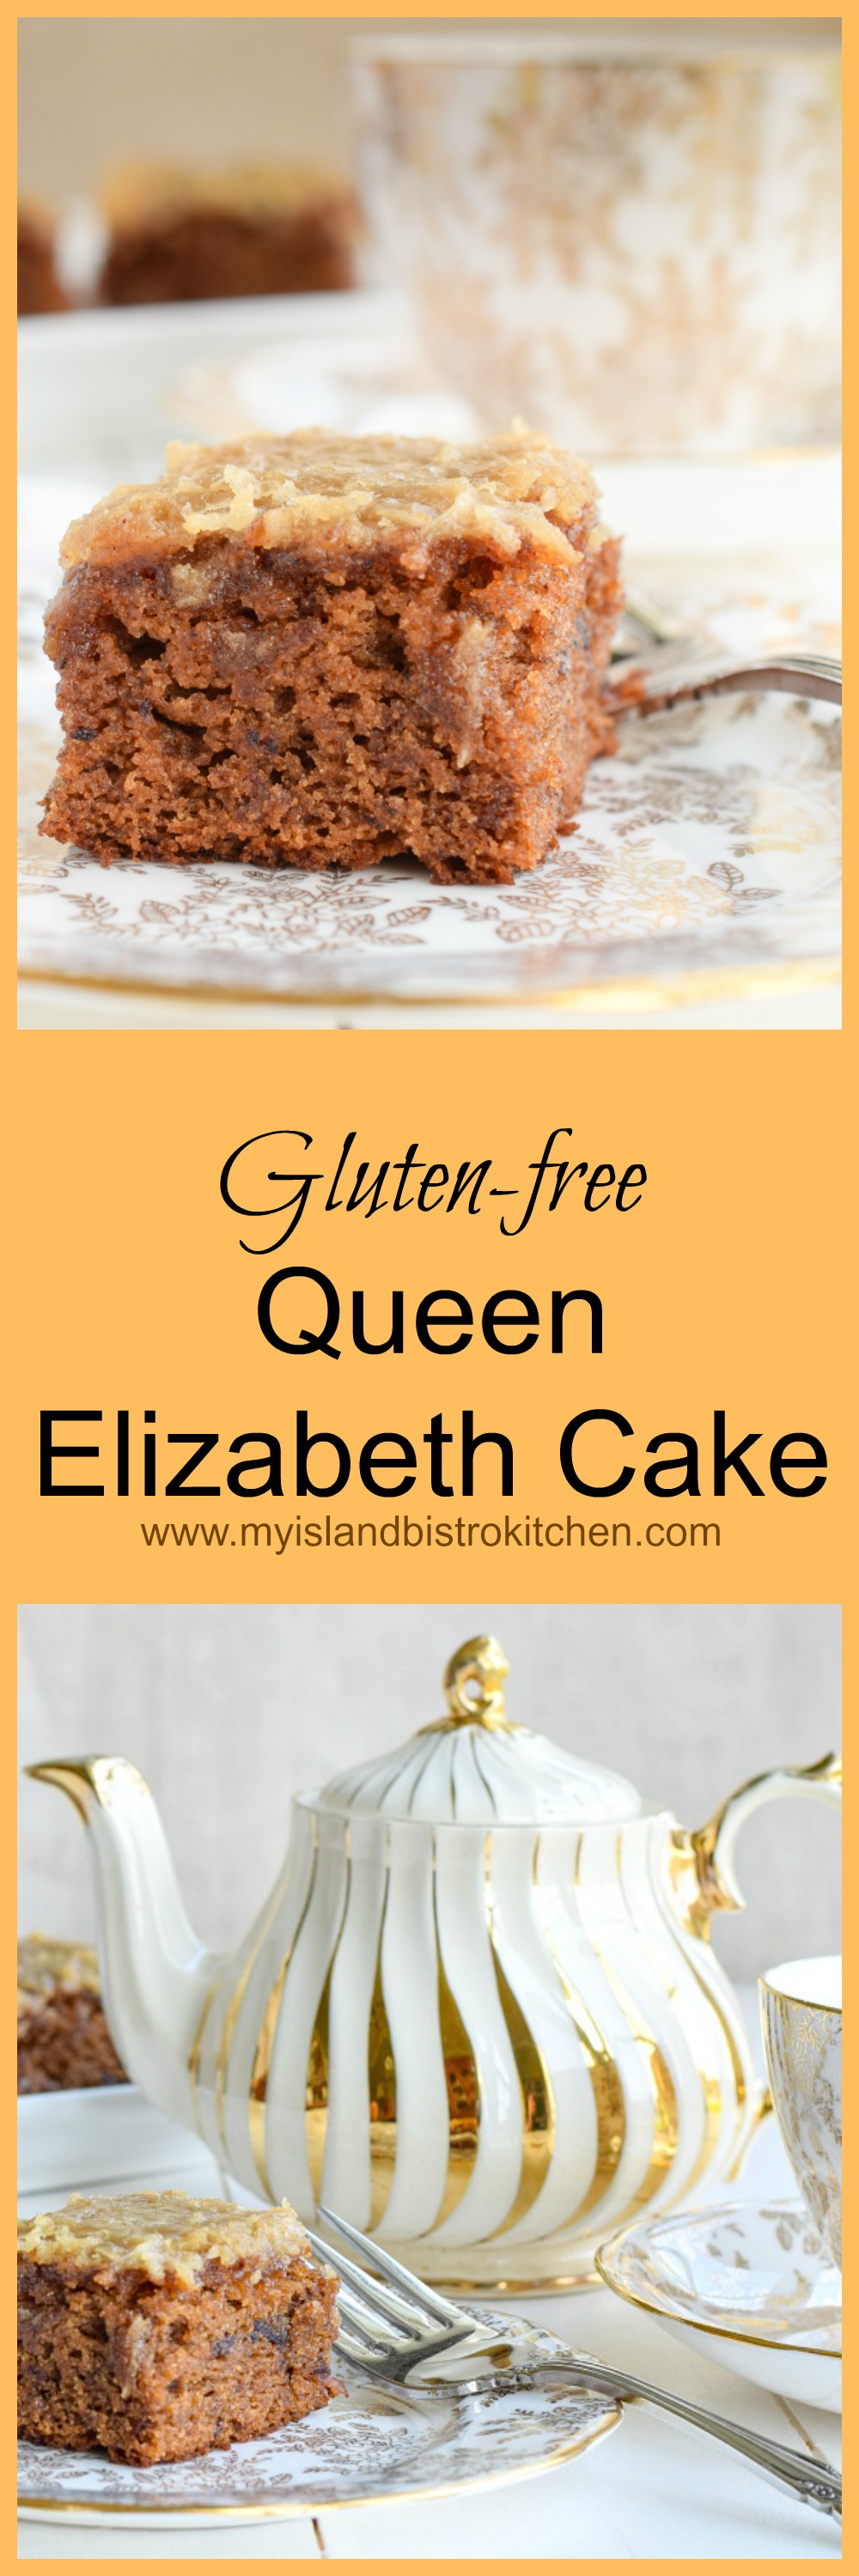 This gluten-free Queen Elizabeth Cake features dates, spices, and a delectable toffee-like topping